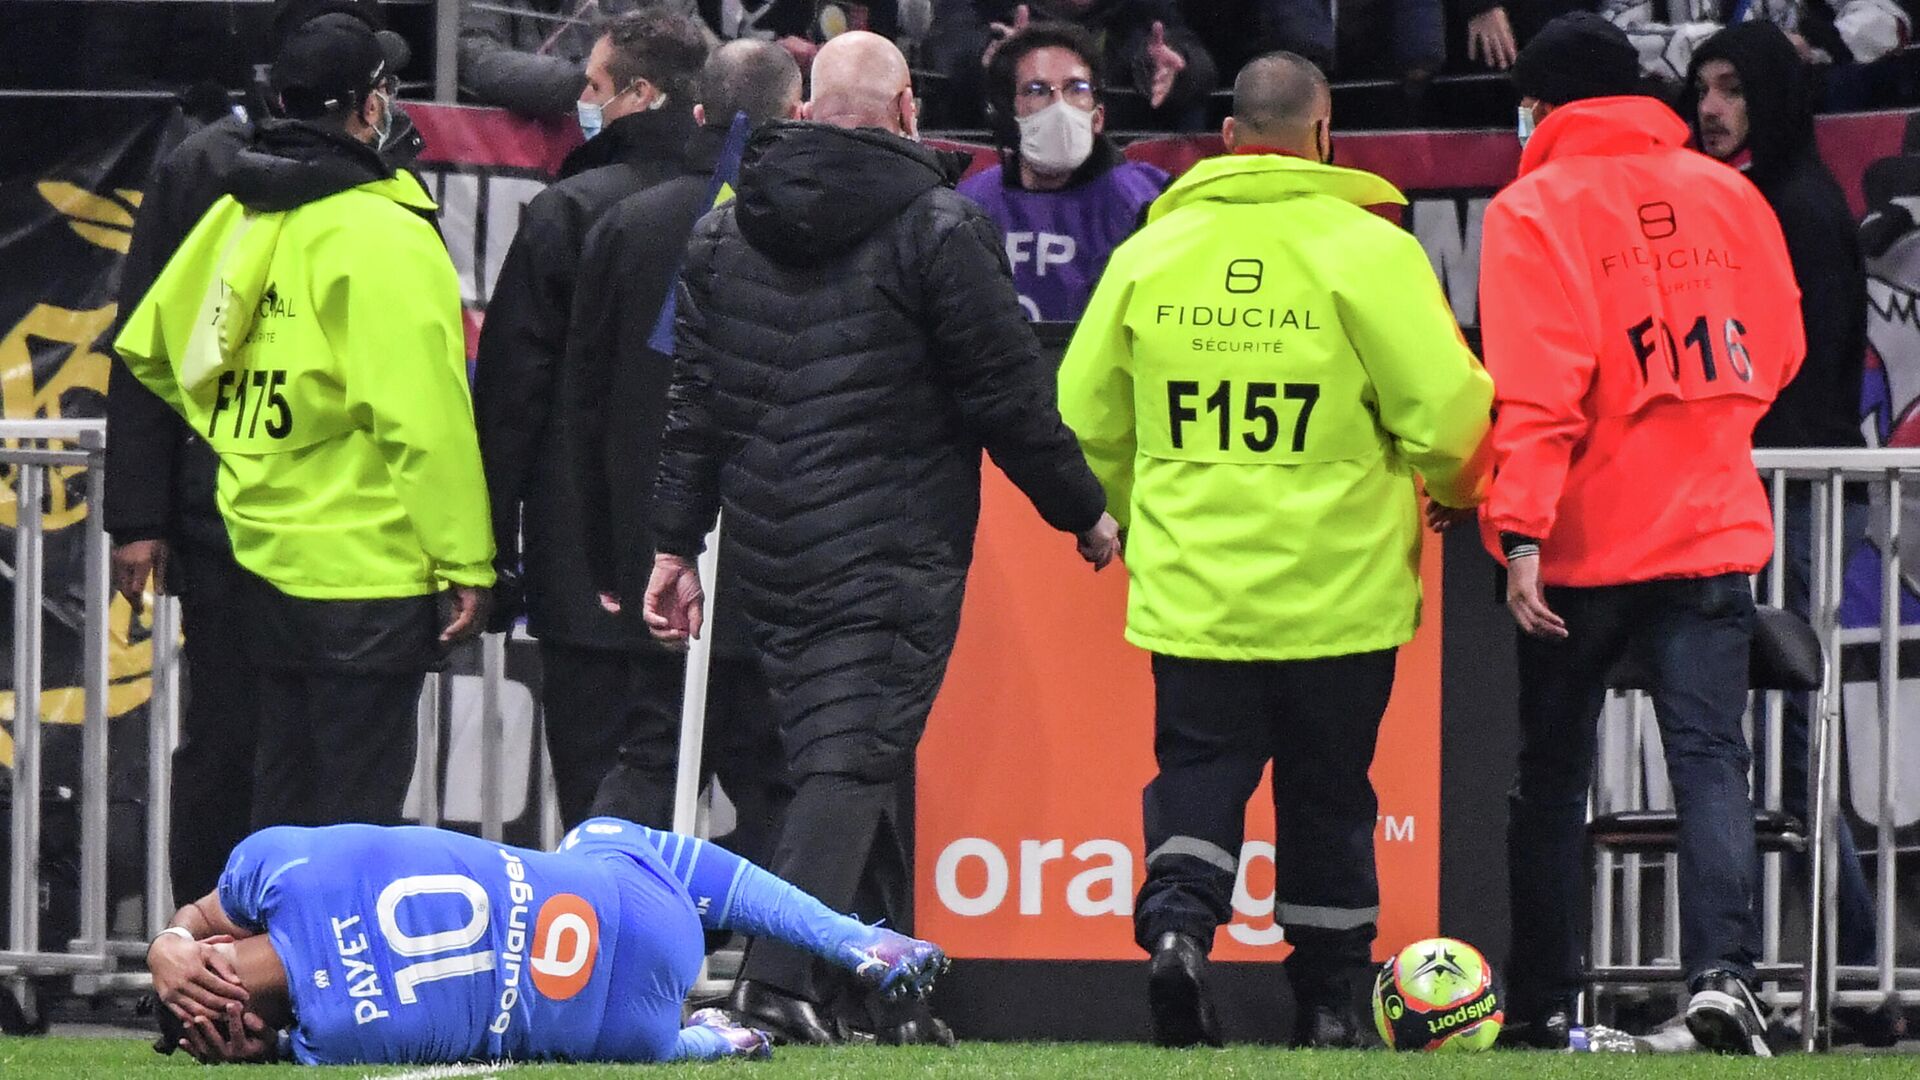 Marseille's French midfielder Dimitri Payet is lying on the field after having received a bottle of water from the grandstand during the French L1 football match between Olympique Lyonnais and Olympique de Marseille at the Groupama stadium in Decines-Charpieu, near Lyon, south-eastern France, on November 21, 2021. (Photo by PHILIPPE DESMAZES / AFP) - РИА Новости, 1920, 22.11.2021